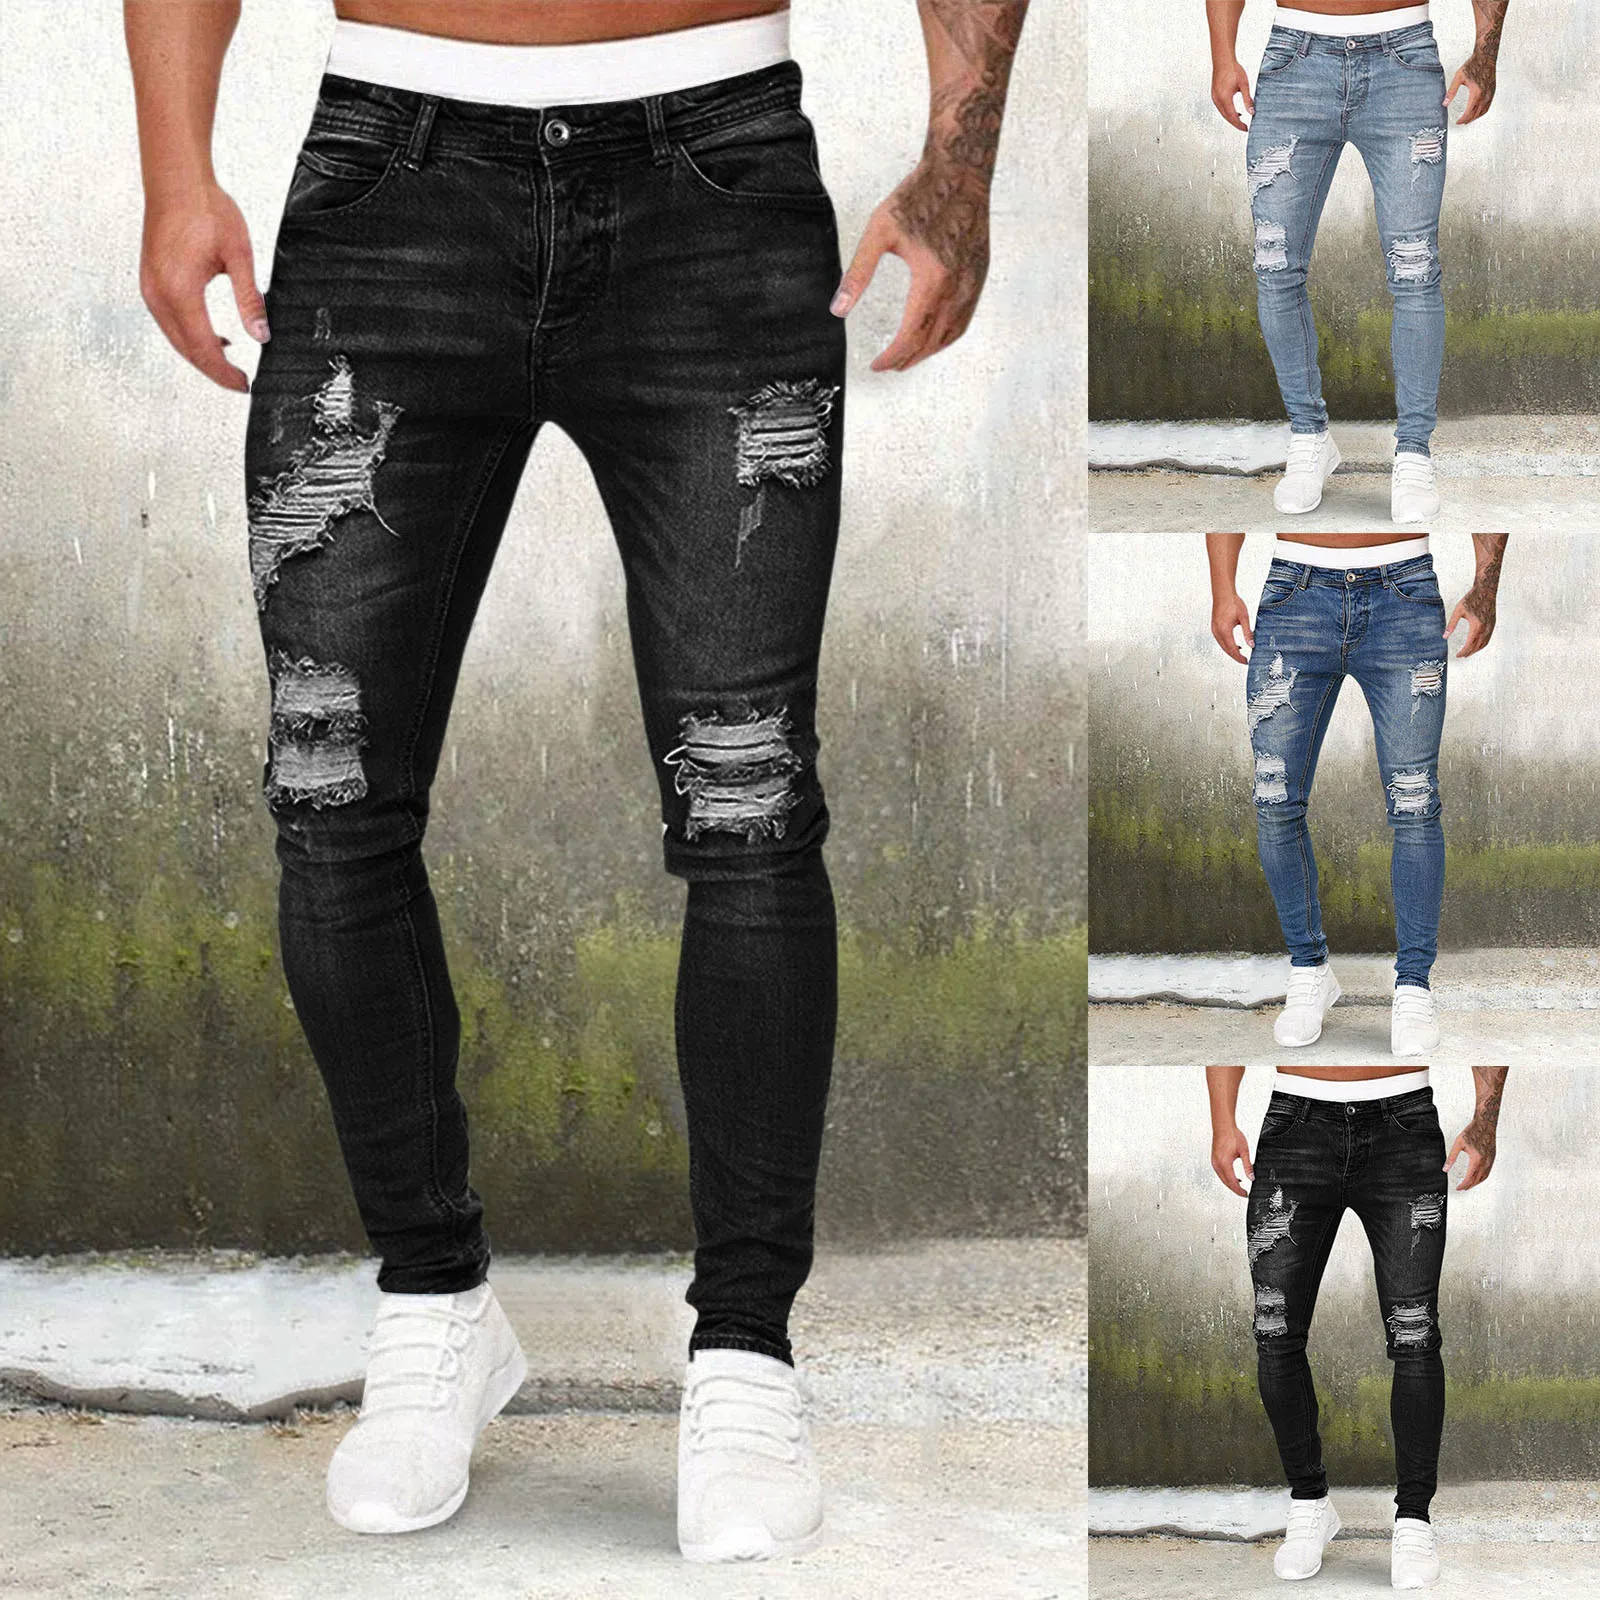 Europe America Mens Ripped Skinny Jeans Blue Slim Hole Pencil Pants Biker Casual Trousers Streetwear High Quality Denim Clothing high cut women hole ripped distressed denim pants 2022 african style shredded jeans casual jeggings girls skinny demin trouser